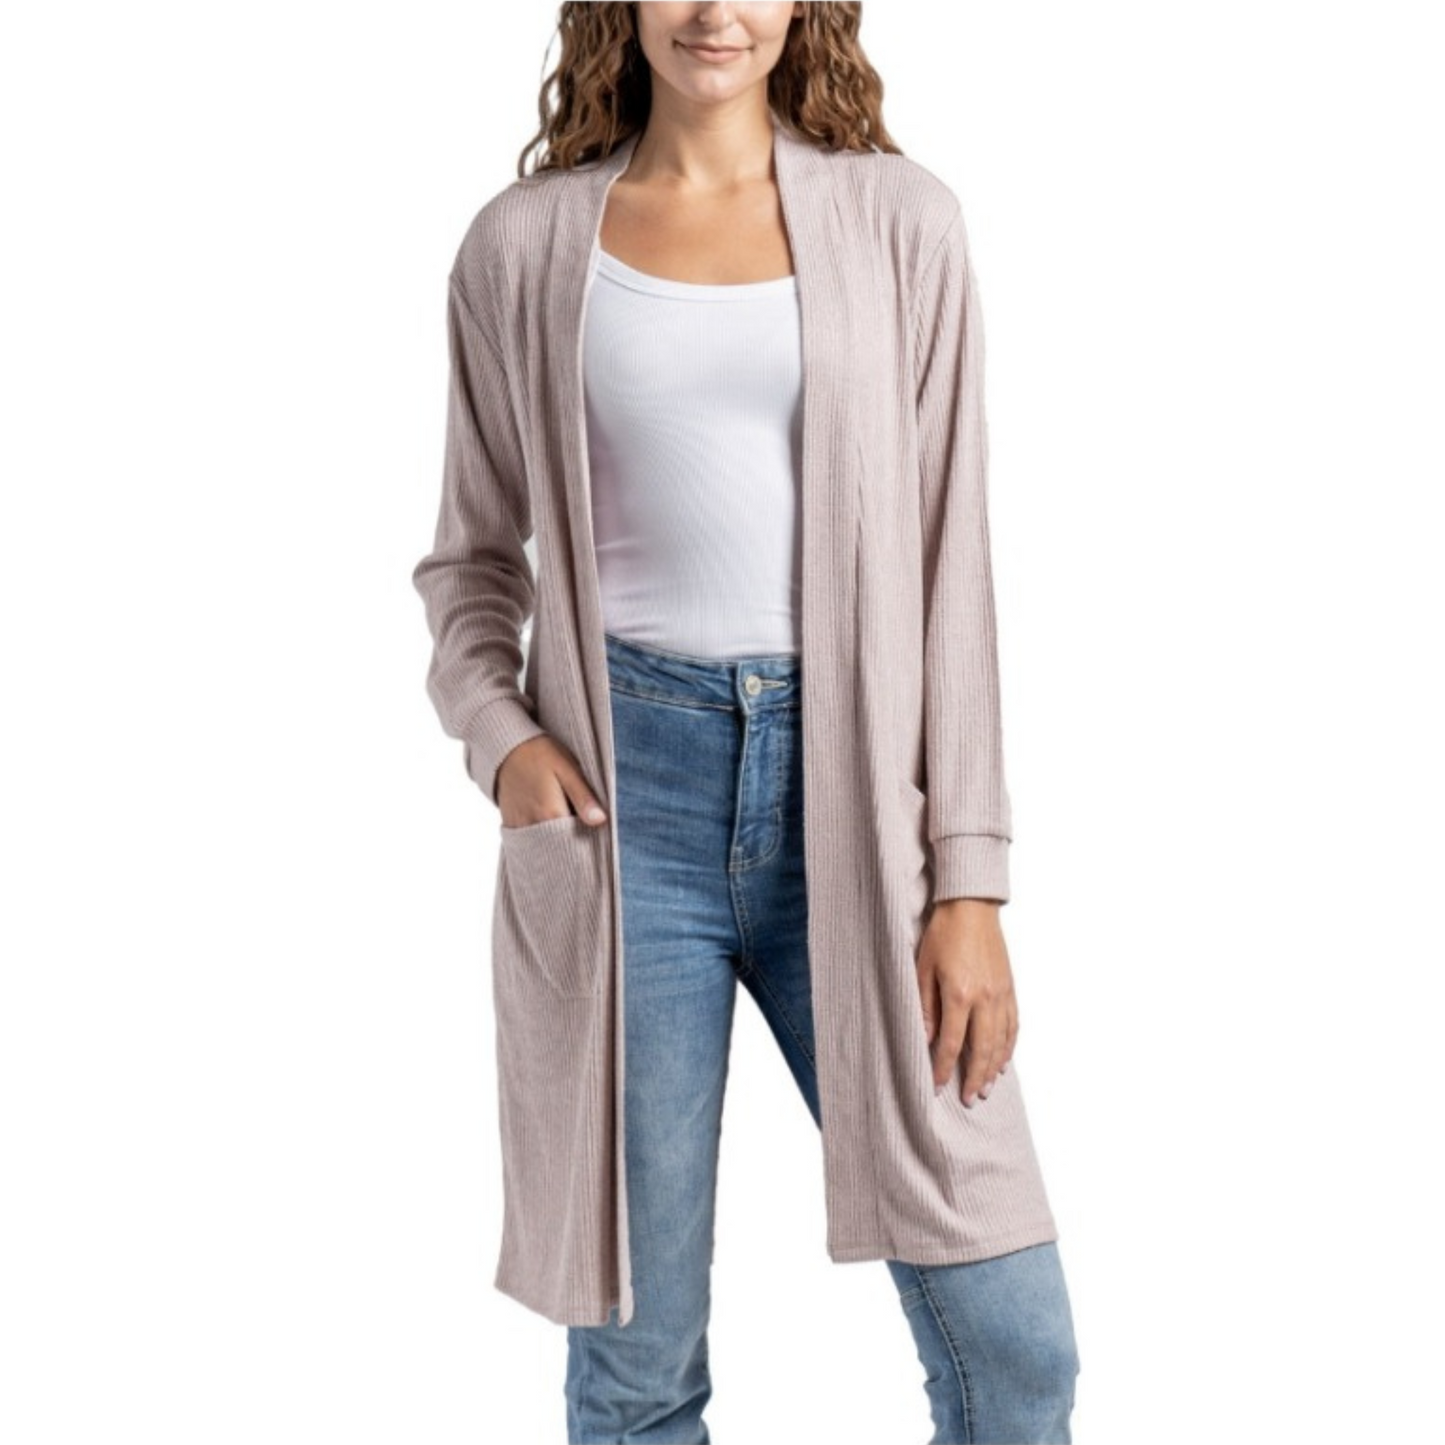 Our Cuddle Blend Cardigan is both comfortable and stylish. The Cuddle Blend Cardigan is crafted with a dreamy, soft fabric and available in pink and grey. Pair it with the matching tank and pants for the ultimate loungewear look.